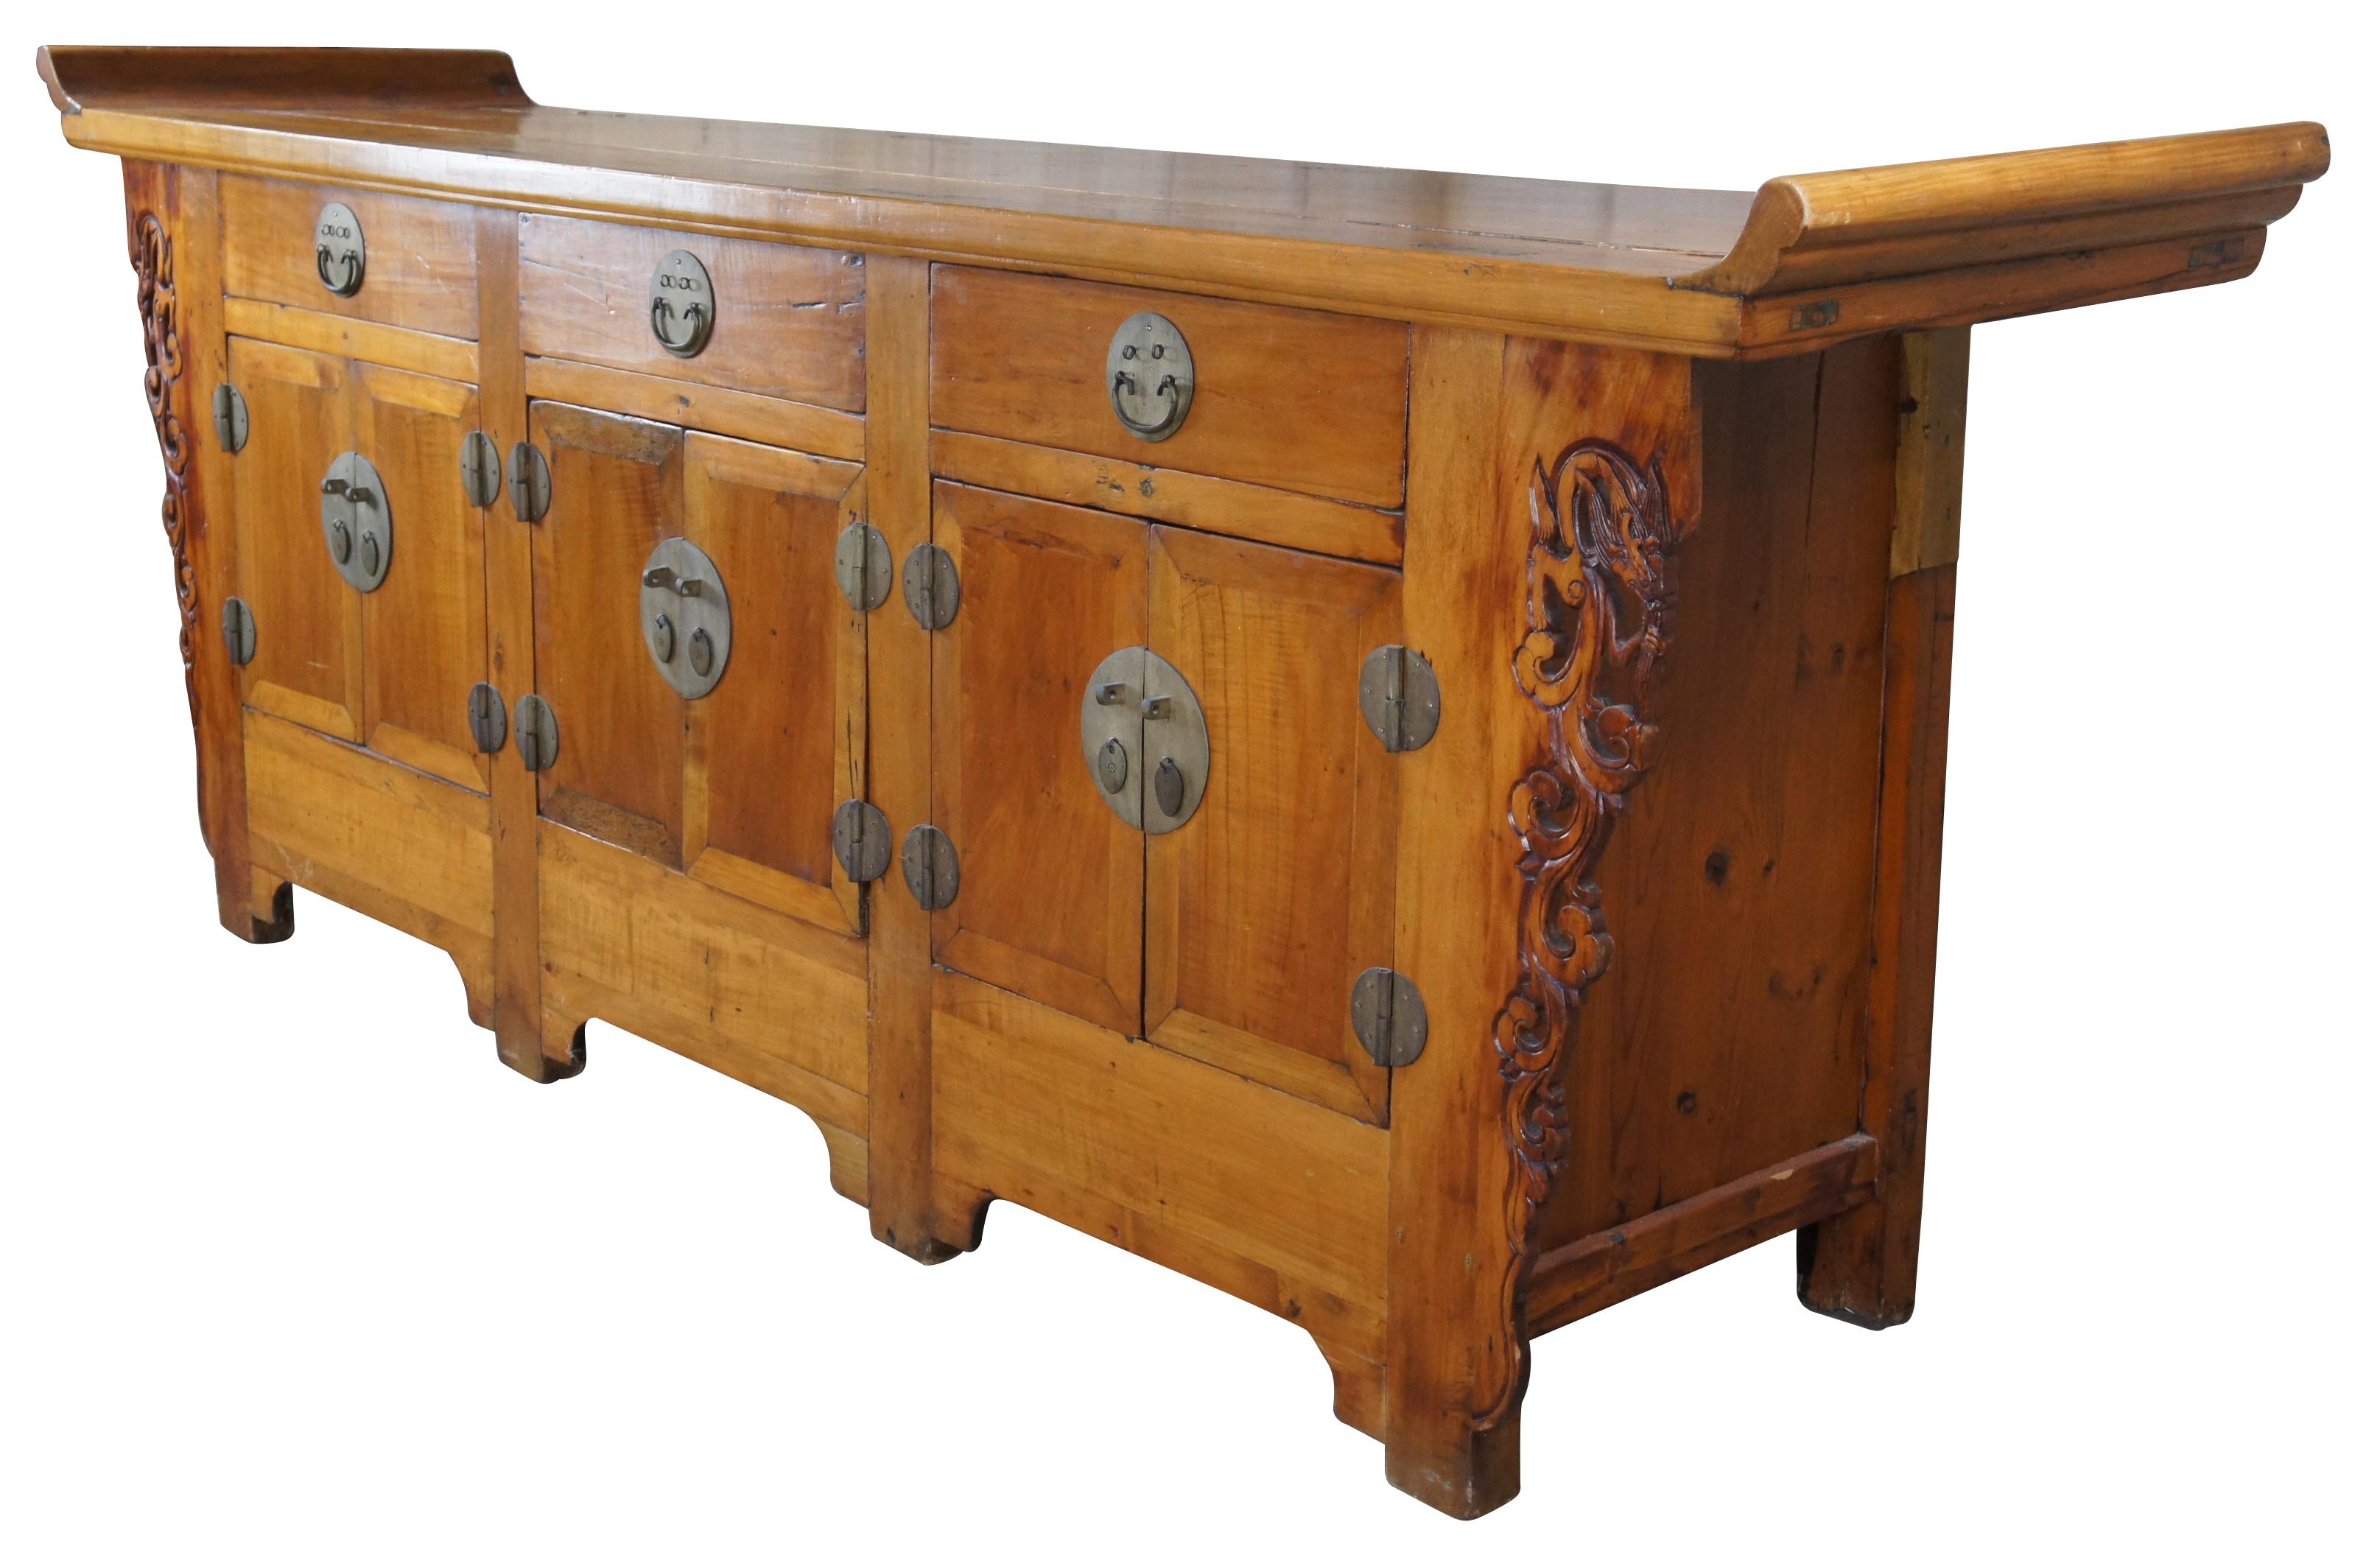 A very large and impressive Chinese Qing Dynasty three door altar coffer, sideboard or credenza, circa 1870s. Made from elm in mortise and tenon construction with dovetailed drawers over lower cabinets with shelves. Features carved and pierced